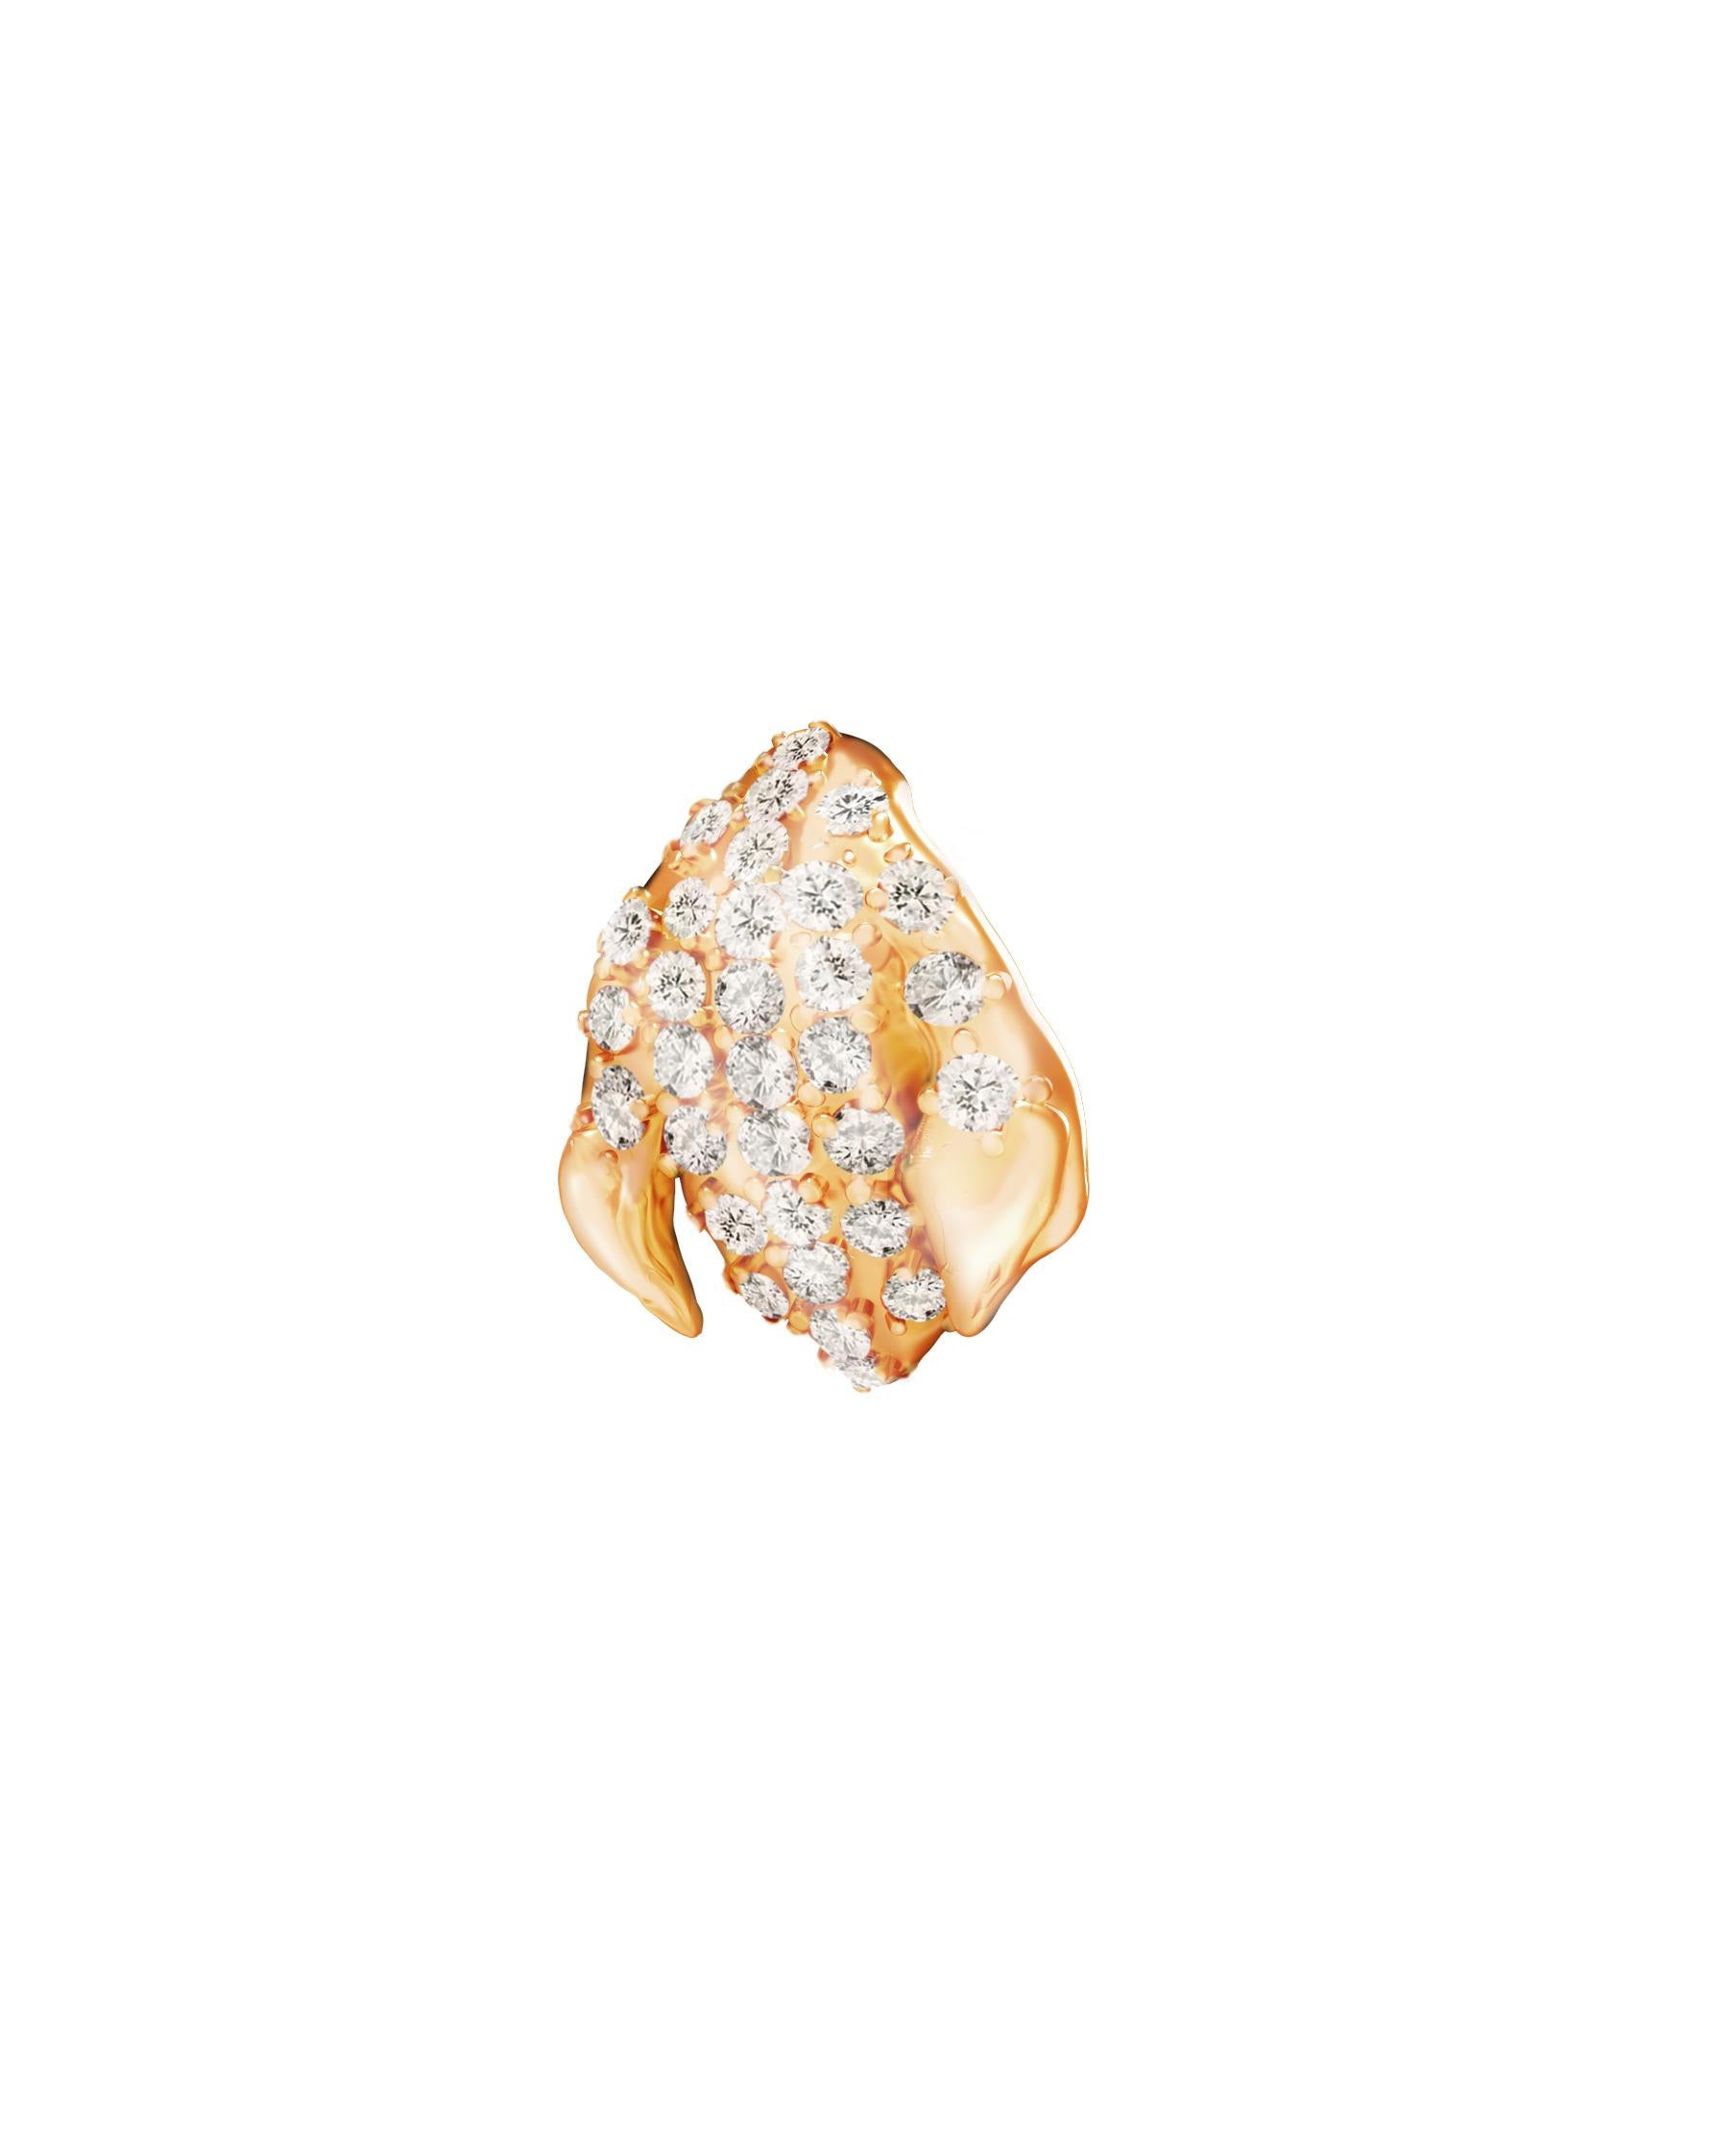 This contemporary Peony Petal floral brooch is in 18 karat yellow gold with 31 round natural diamonds, 0,5 carats, VS, F-G. The sculptural design adds the extra highlights to the surface of the gold. The diamonds add the delicate blinks. Flowers